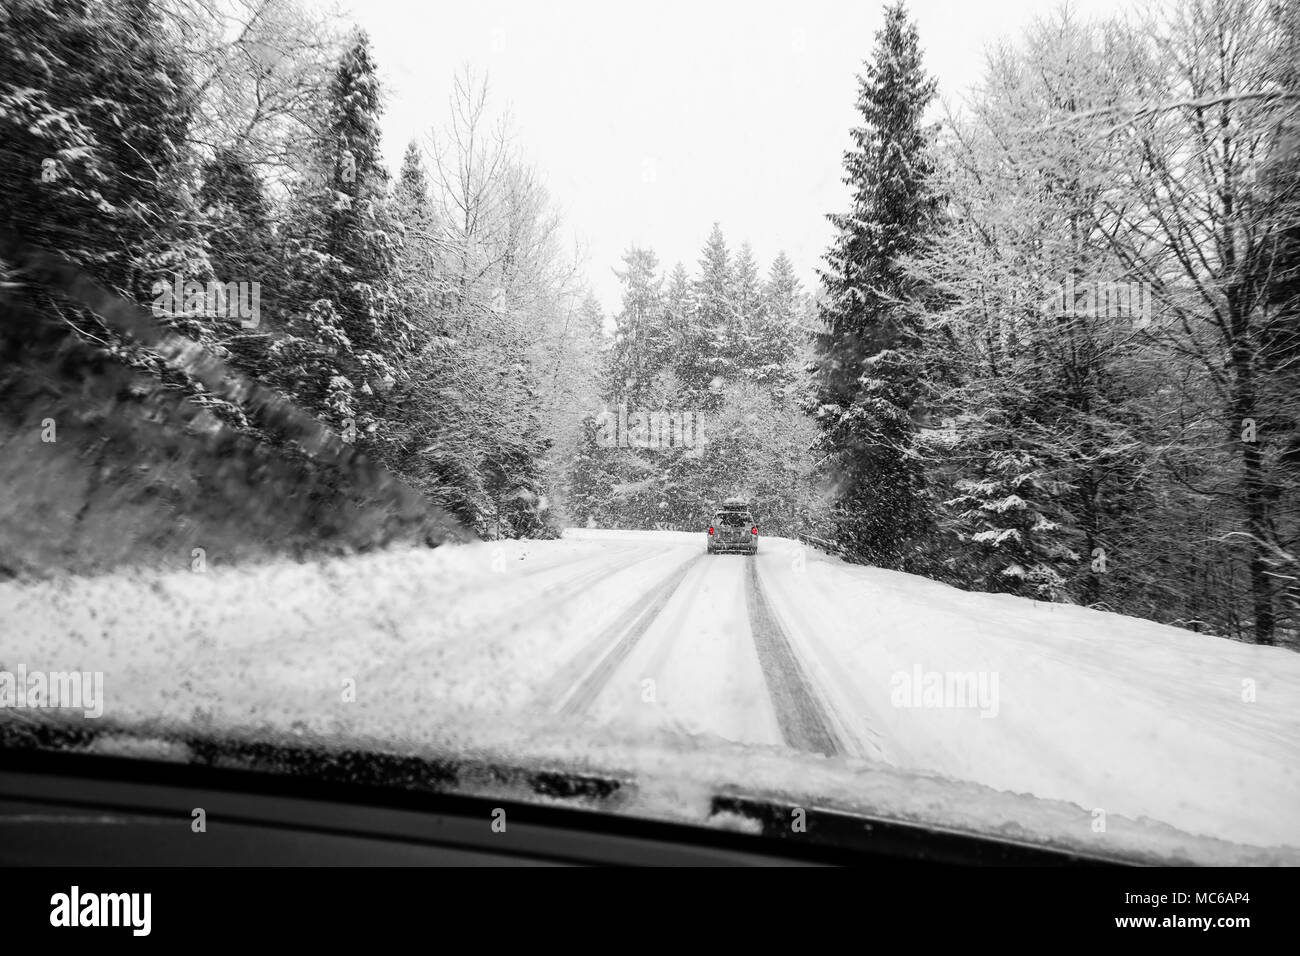 Car driving during winter snow taken through a windshield covered with blured snowflakes. Stock Photo